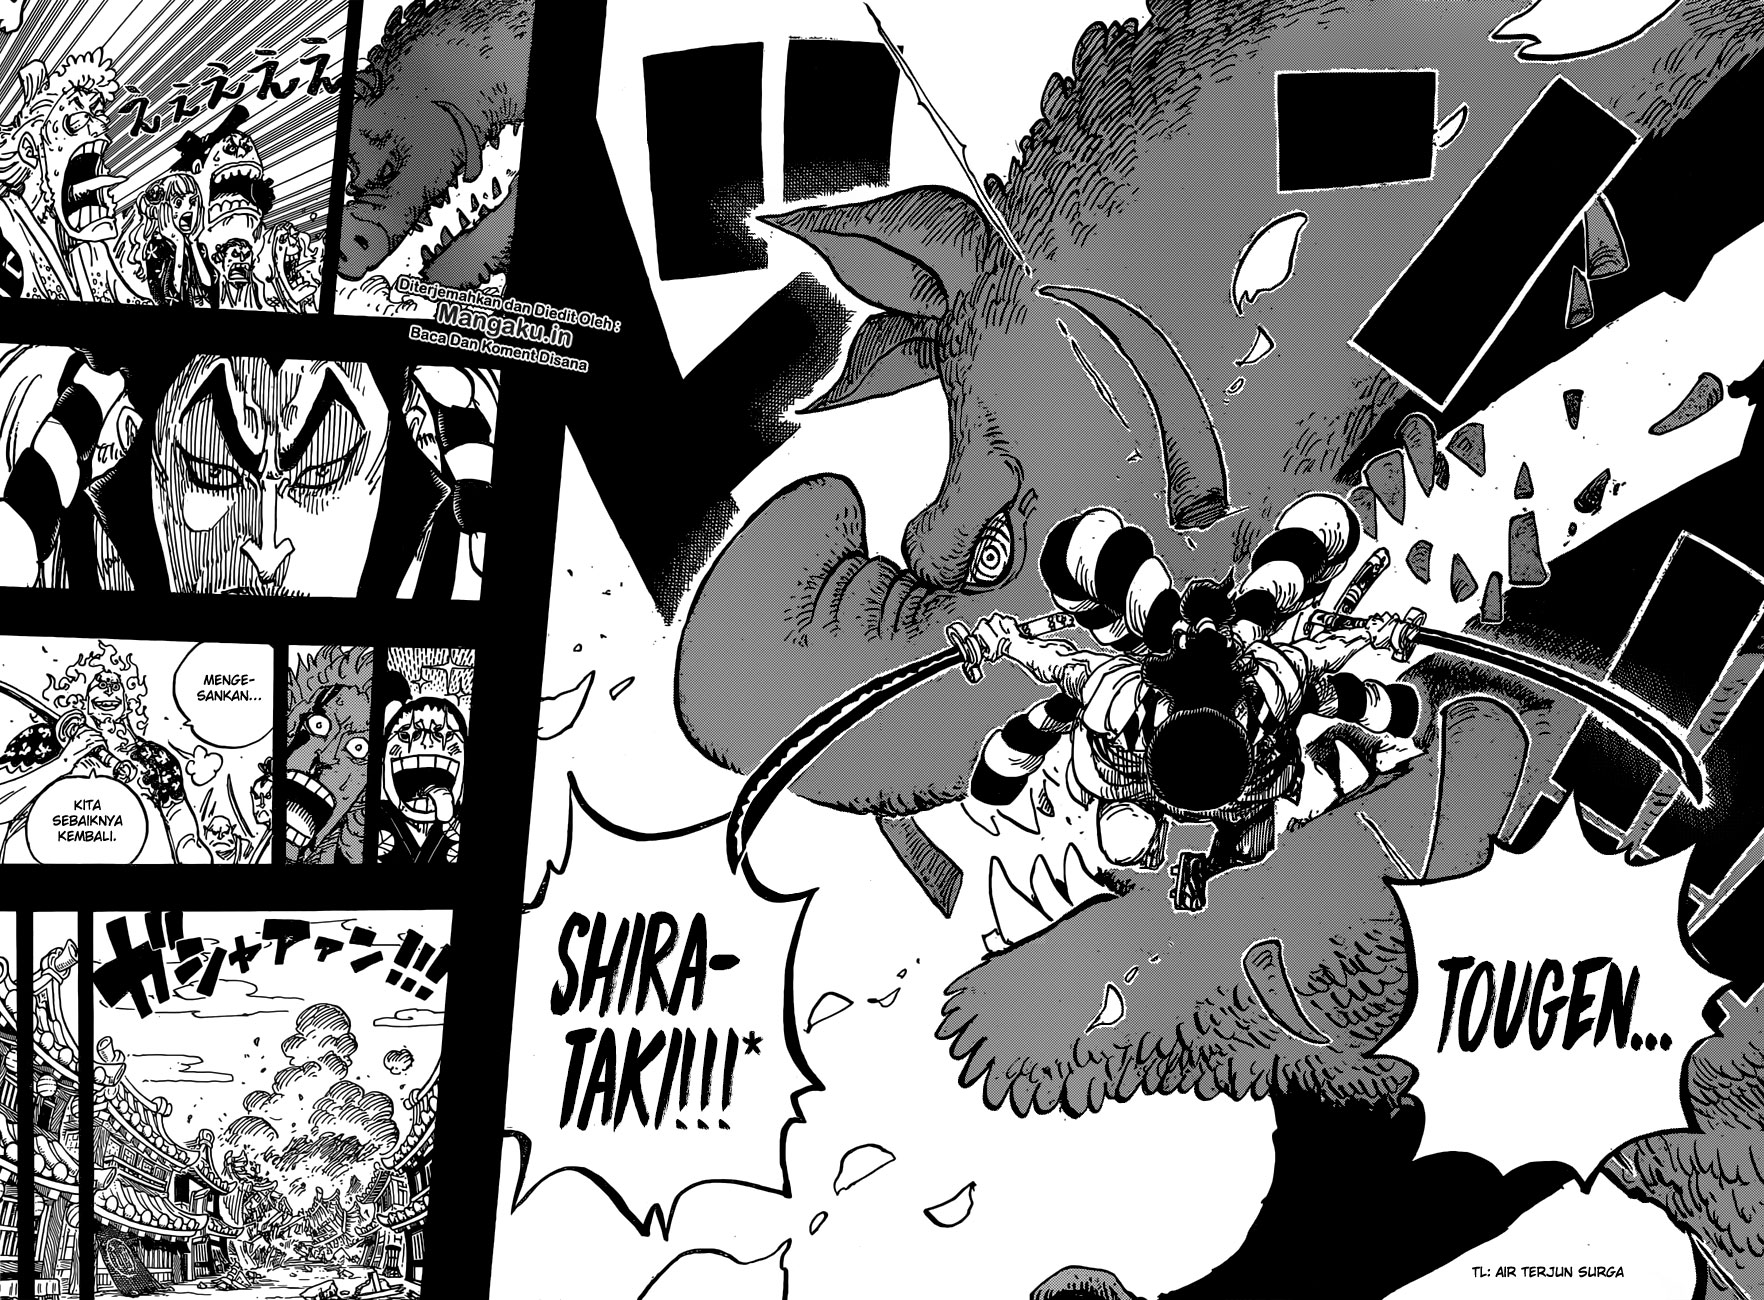 One Piece1 Chapter 961